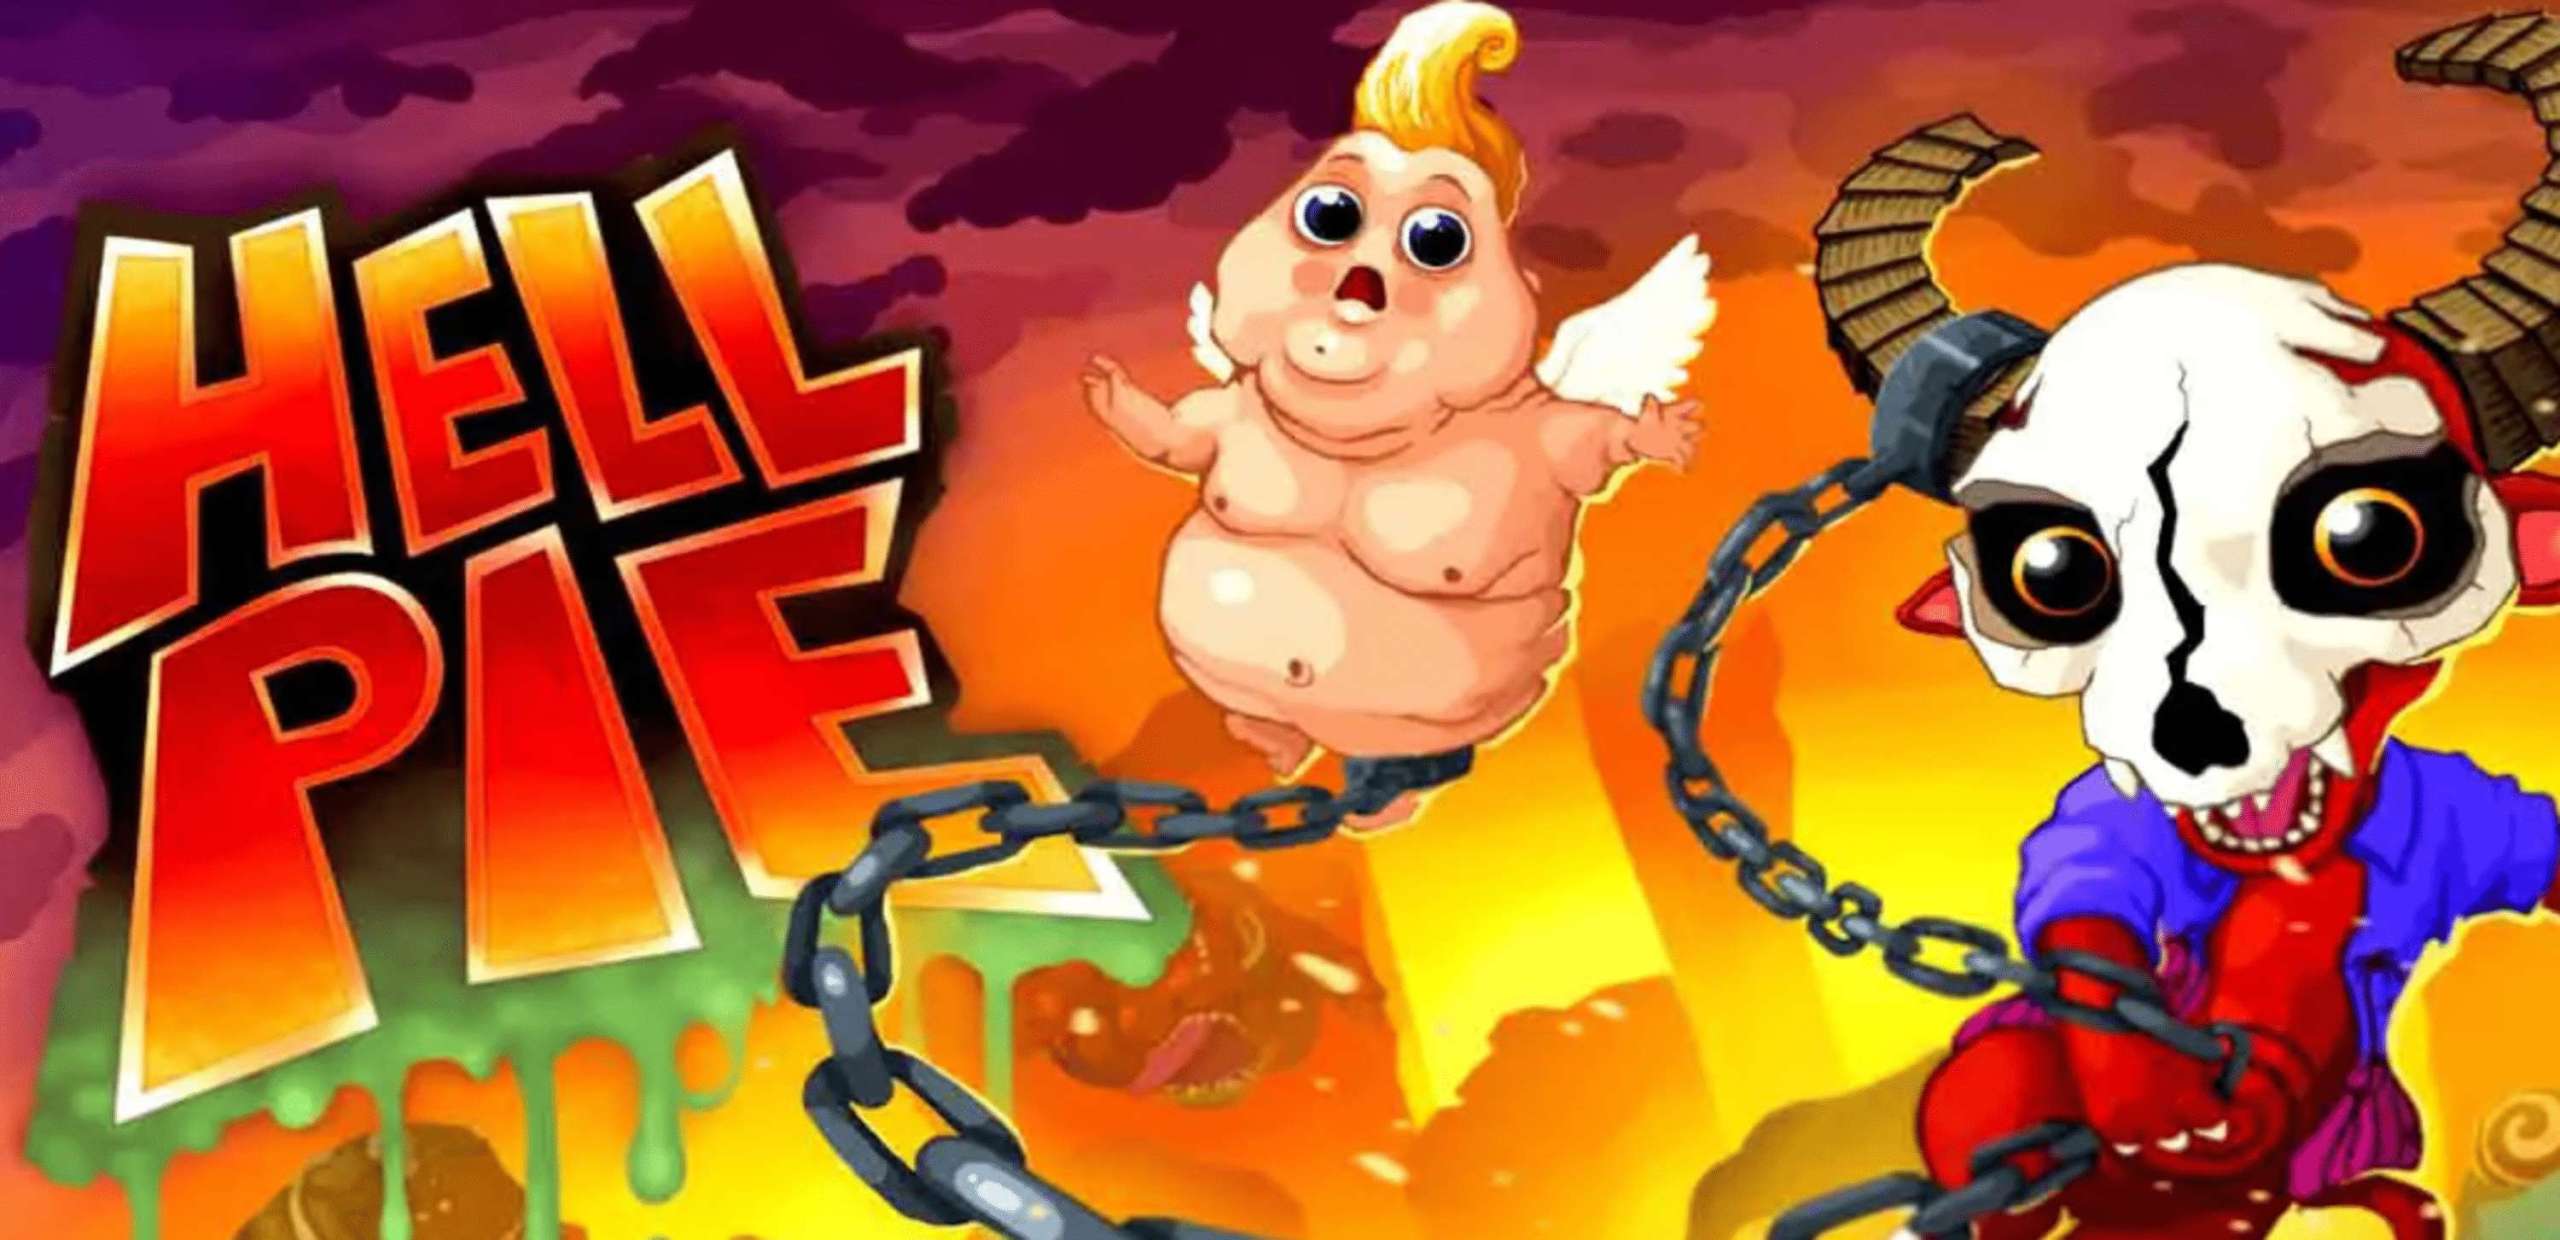 Hell Pie Is A Horrible 3D Platformer That You Might Have Missed